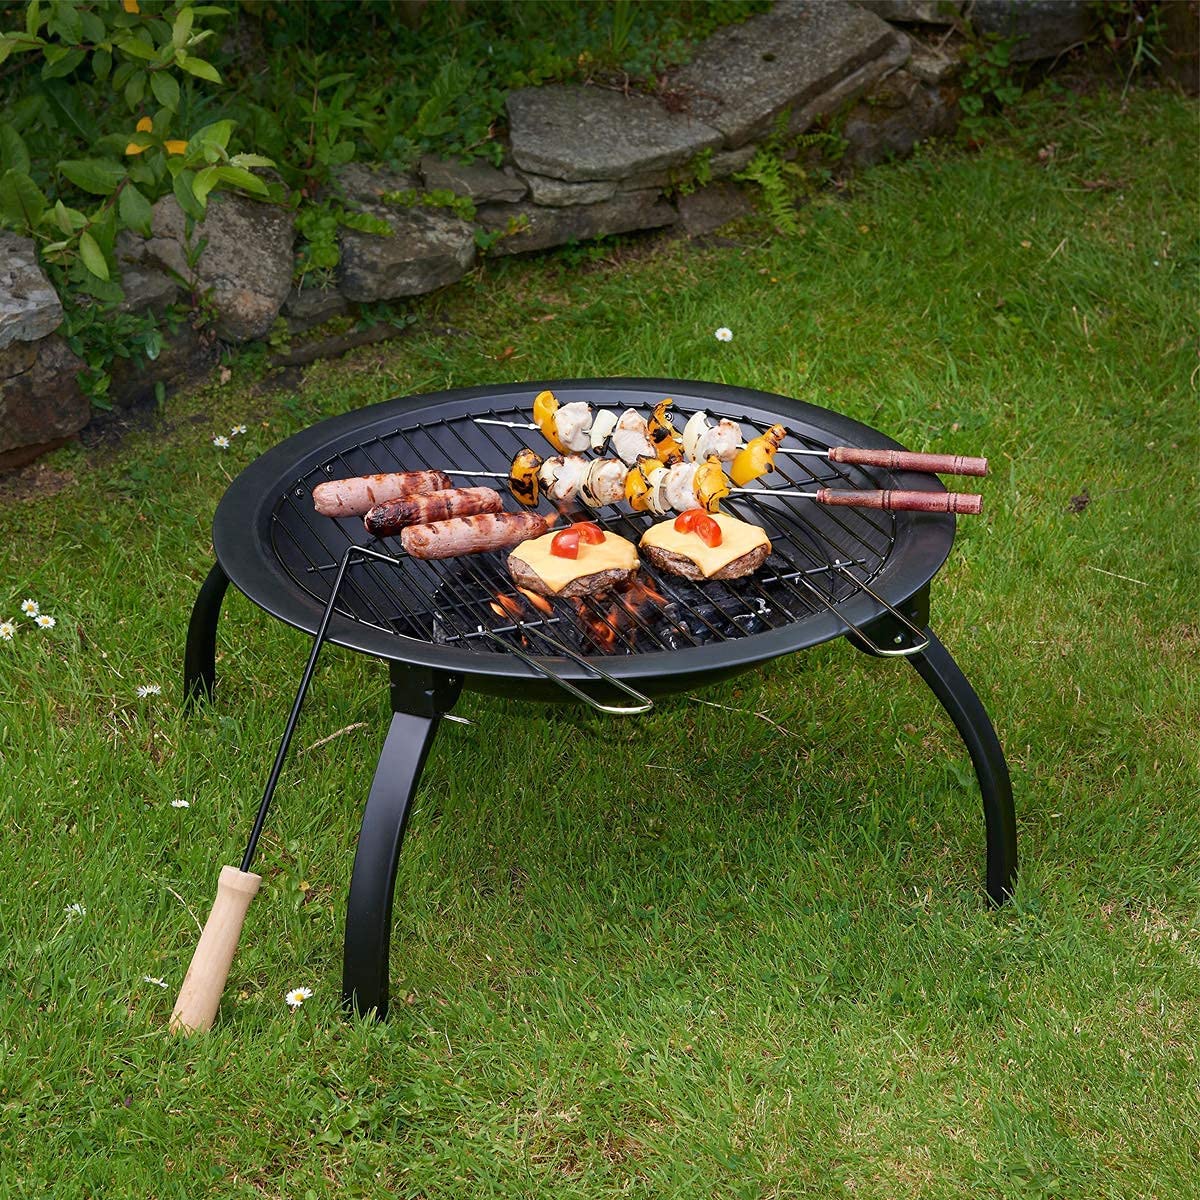 22" BBQ Grill and Firepit